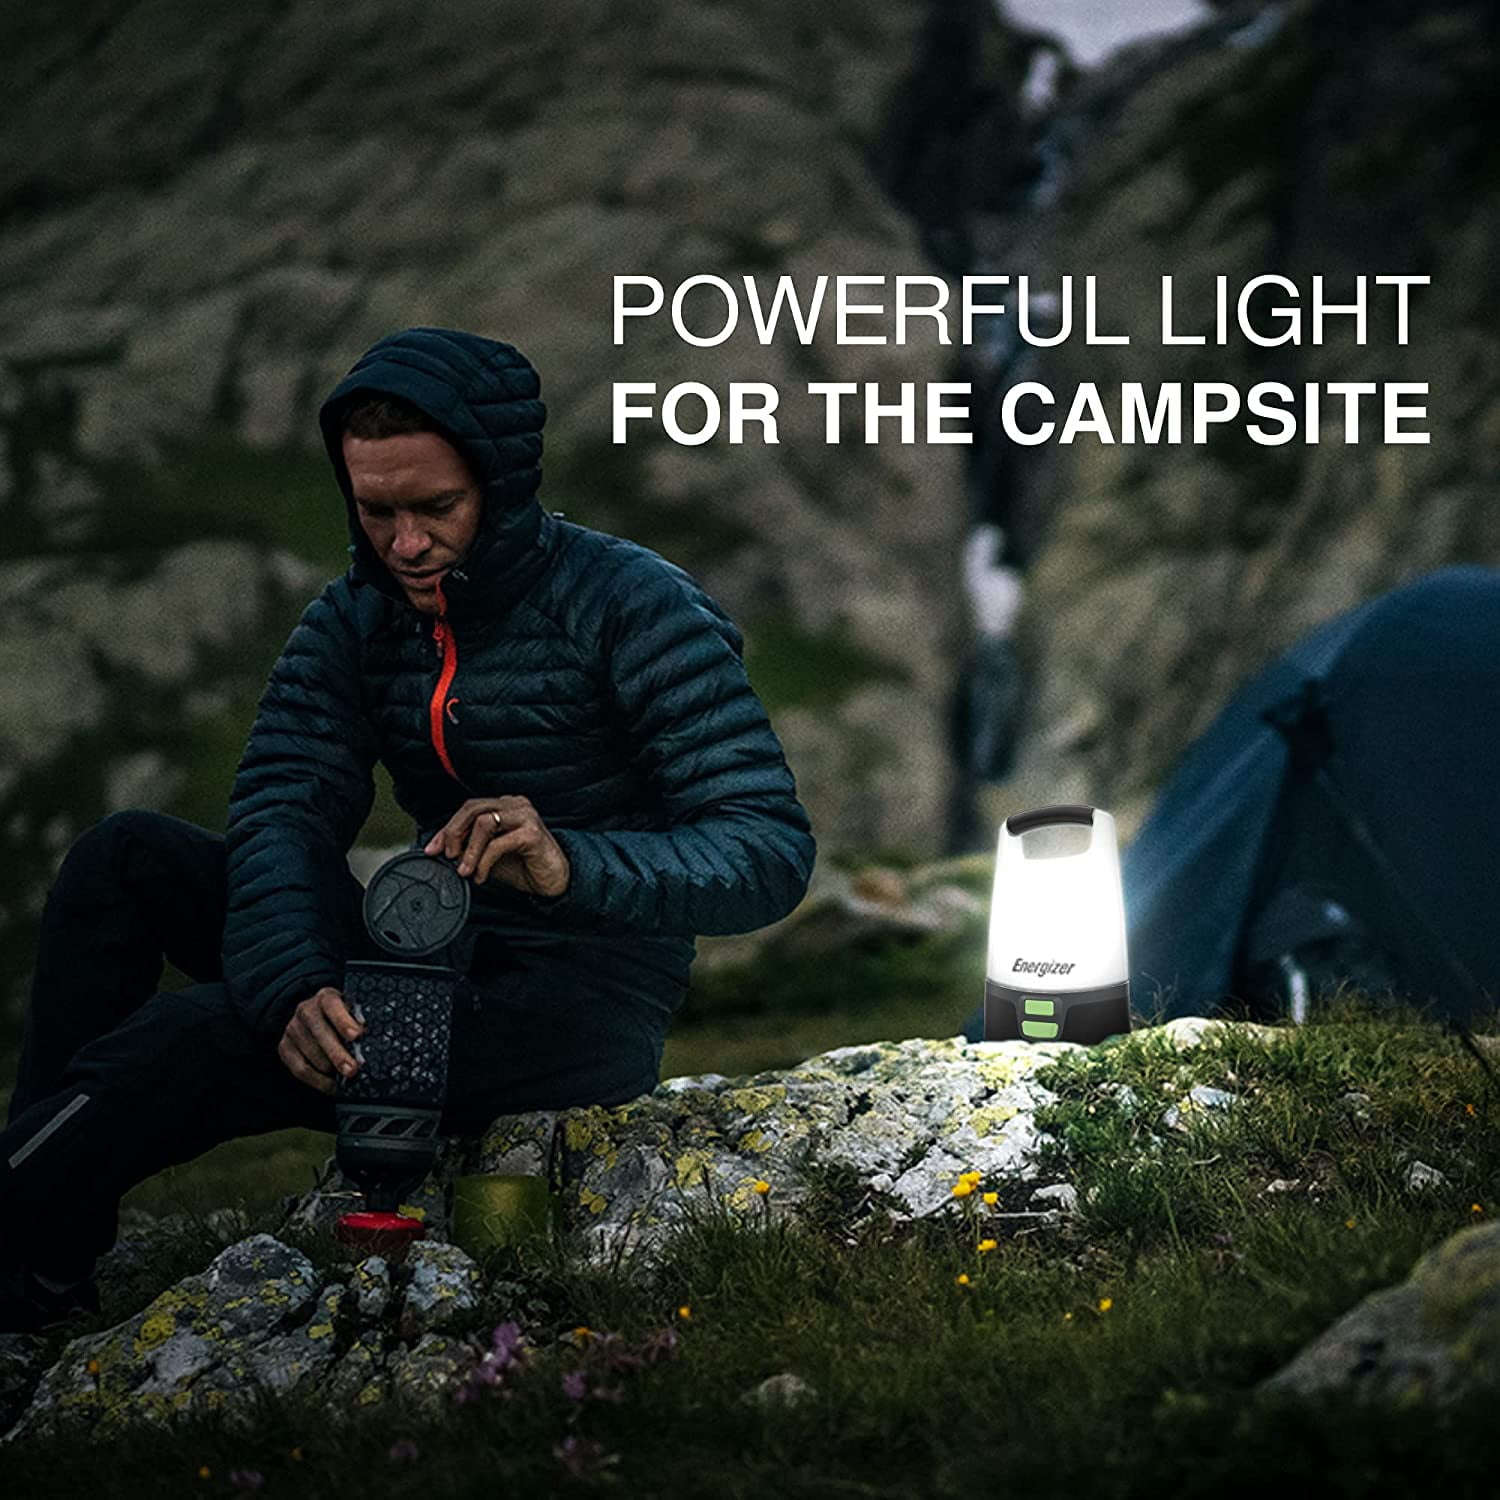 Vision USB LED Devices Light, Lantern, Port Camping Outdoor or to Versatile Charge Energizer Lantern, Light Emergency